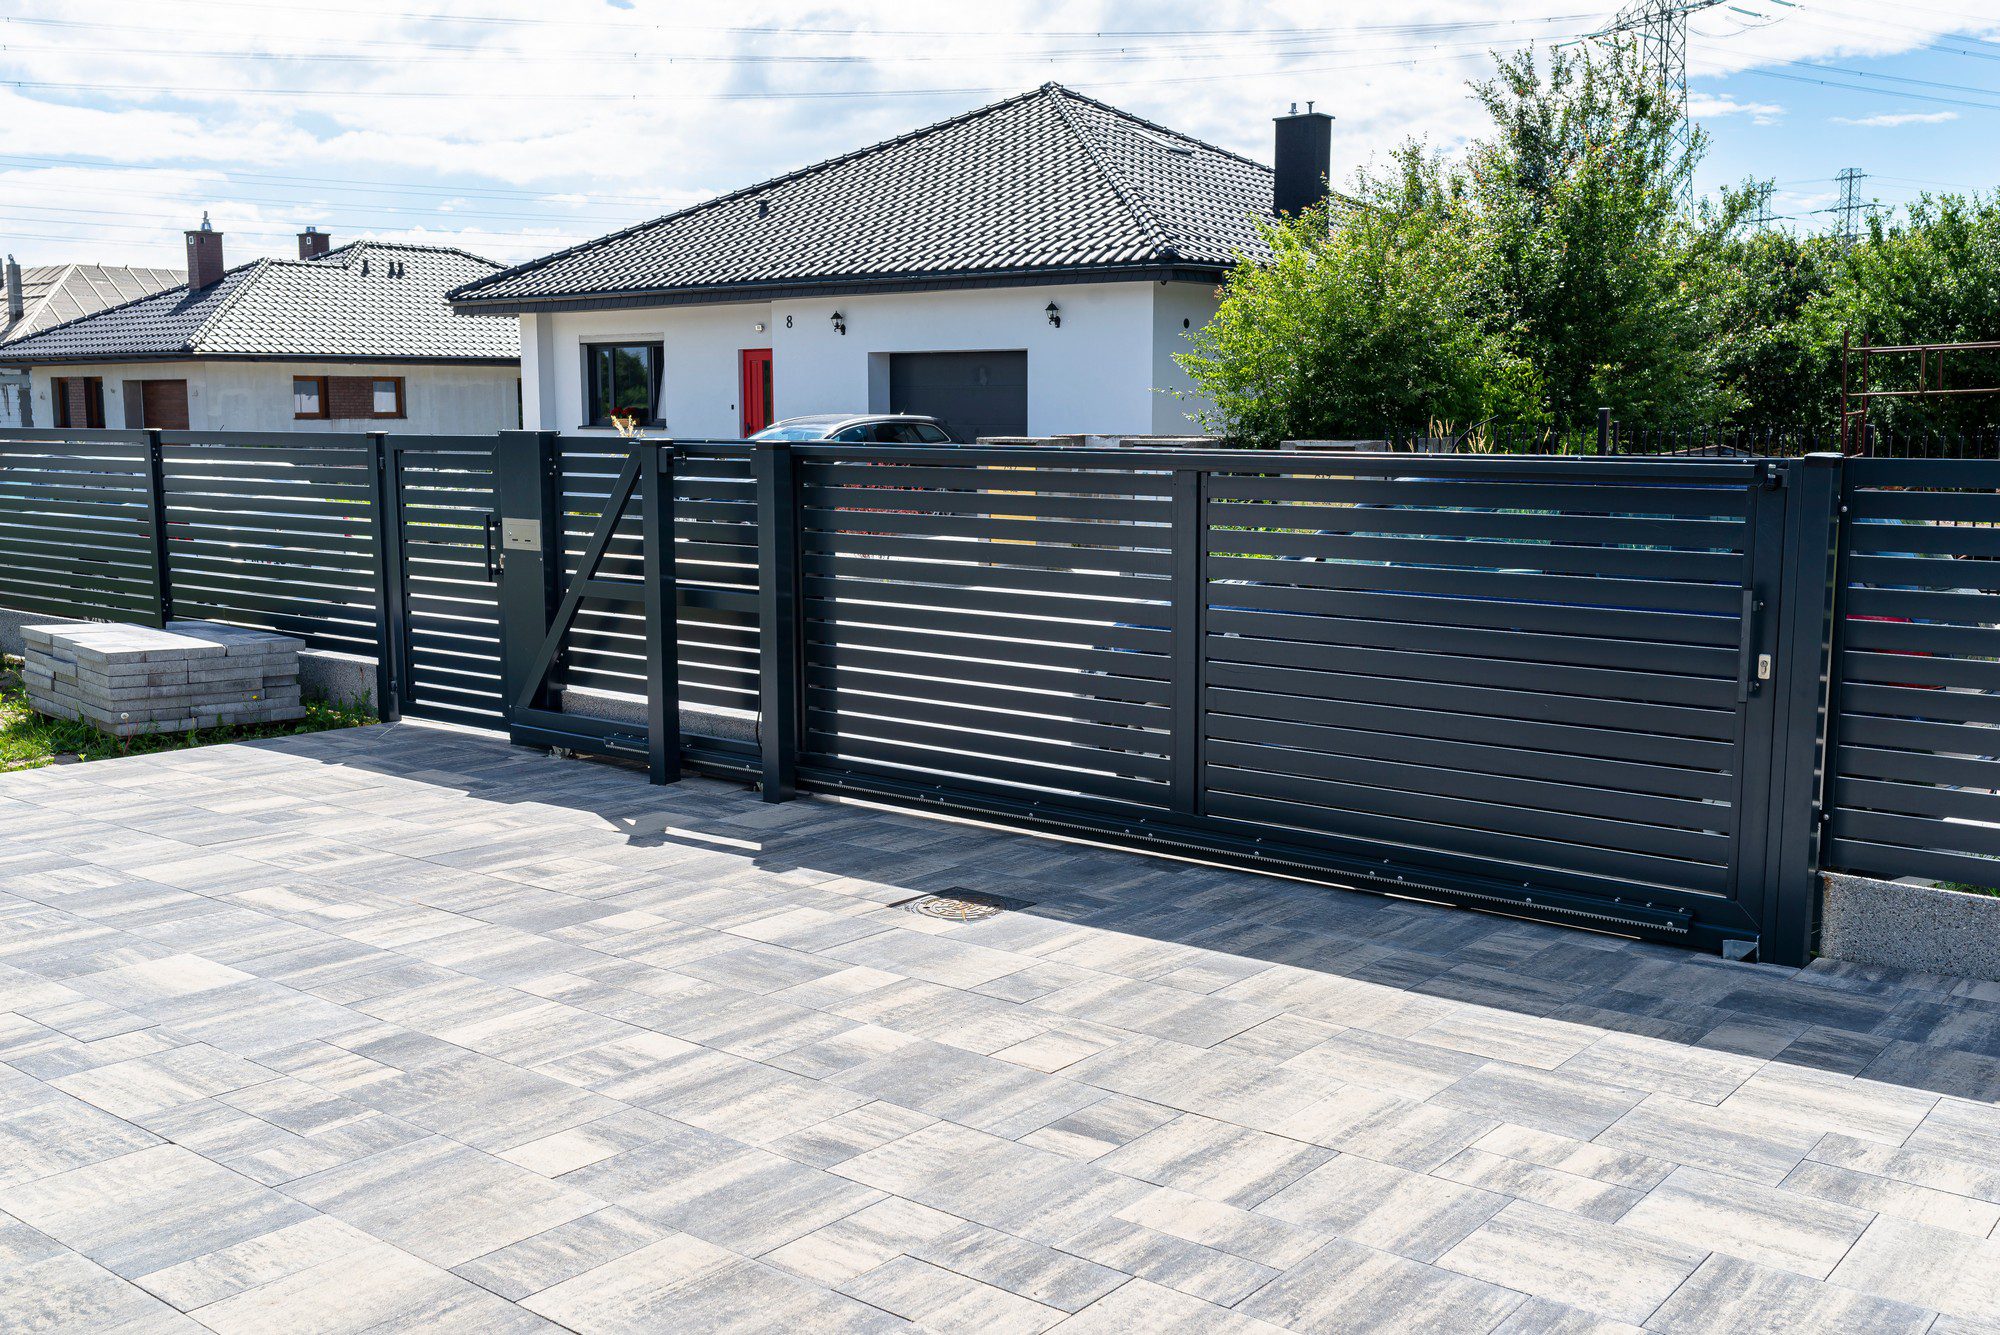 The image shows a residential setting with a modern driveway and fencing. Key elements in the image include:- A sliding gate: The dark gray gate appears to be made of horizontal slats, allowing for some visibility and light to pass through while still providing privacy and security.
- Matching fence: The fence complements the gate with a similar design and colour, providing a cohesive look to the property's boundary.
- Paved driveway: The driveway is paved with interlocking stone tiles arranged in an orderly pattern, suggesting a well-maintained entrance to the property.
- Modern houses: In the background, there are modern single-story houses with simple, clean lines. One house has a red door, which is a contrasting detail against the otherwise neutral colours.
- Landscaped areas: There are green bushes and a small tree, which add a touch of nature and soften the hard lines of the architecture and fencing.
- Blue sky with clouds: It's a bright and clear day, as indicated by the blue sky with a few clouds.
- Residential neighborhood: The context suggests a suburban residential area with spacious plots for individual houses.